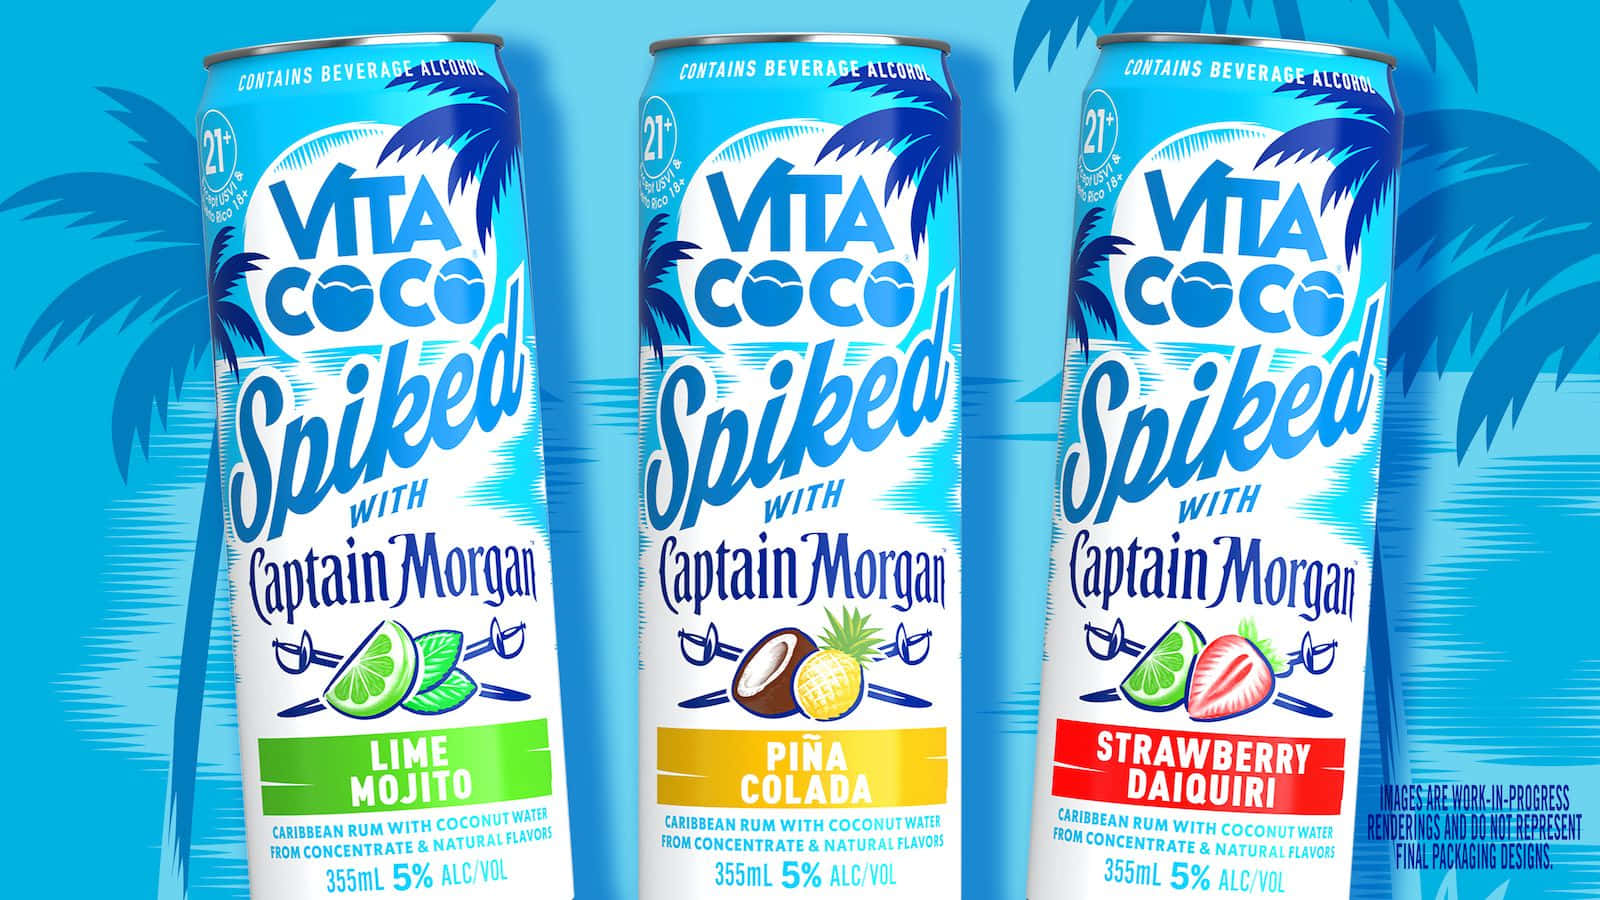 Vita Coco Spiked Captain Morgan Canned Drinks Wallpaper